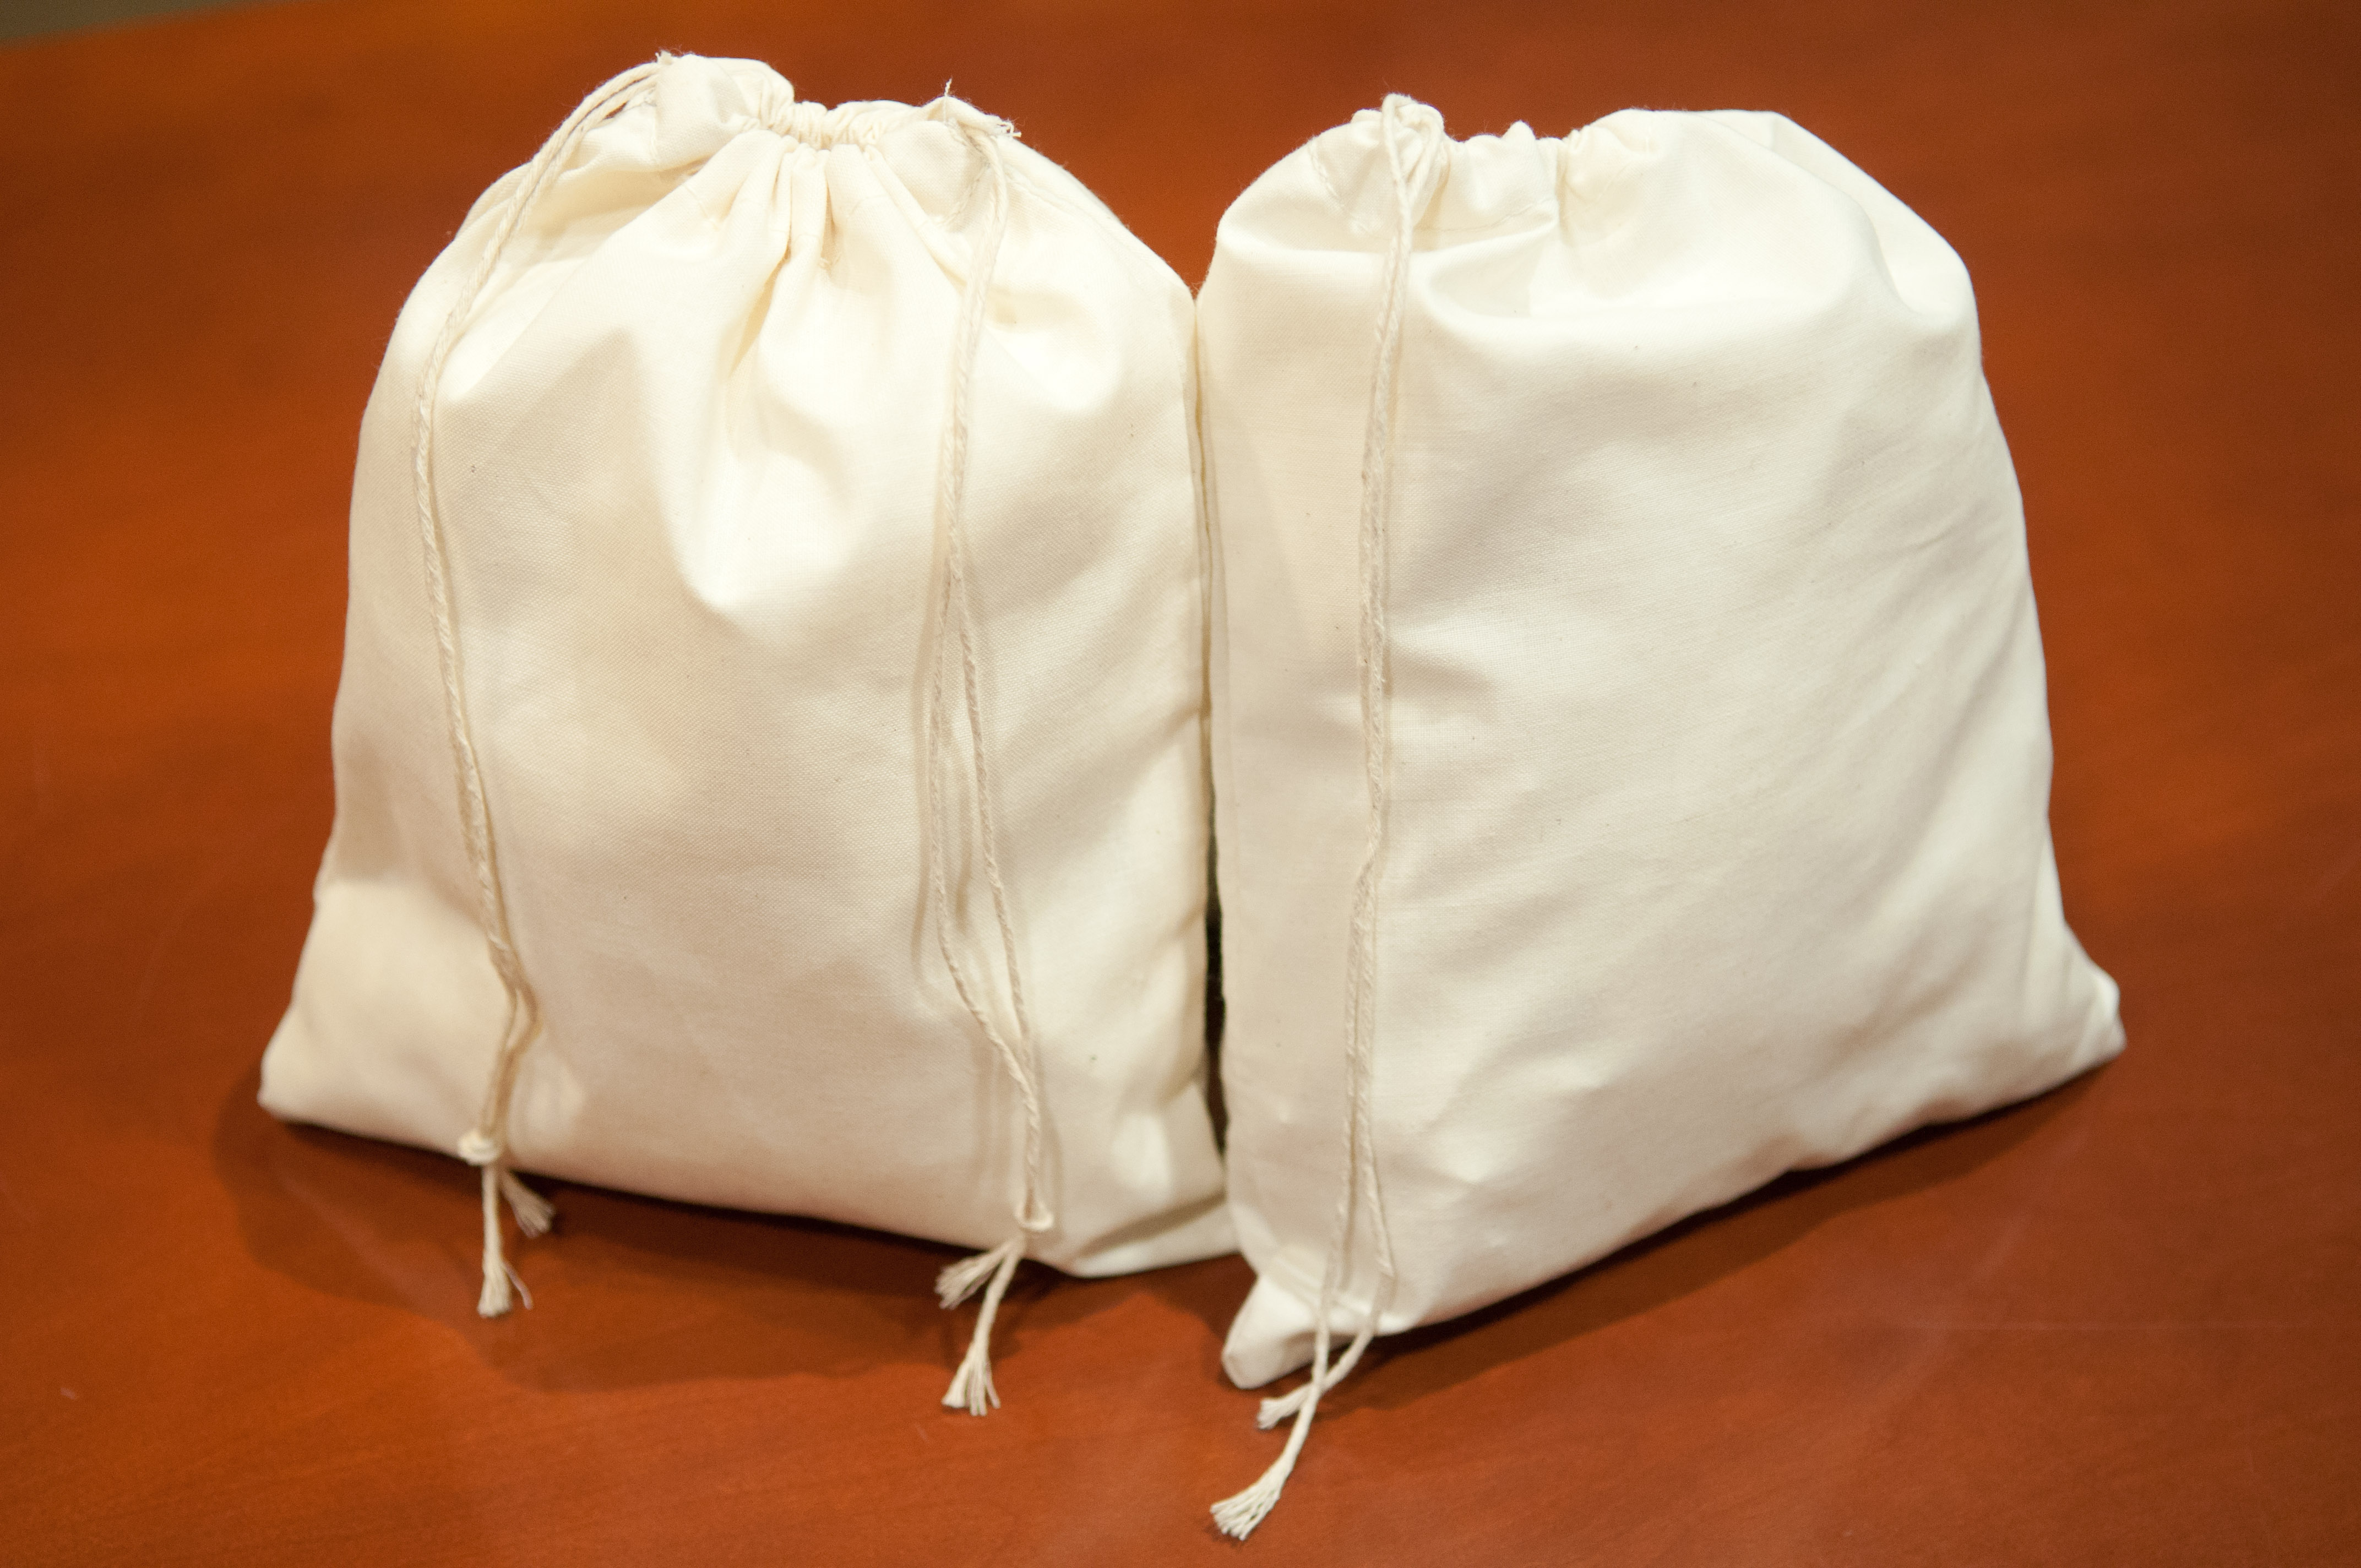 Review of Whoesale Muslin Bags for Charity Events: With the Community Scholarship Foundation of Canon-McMillan